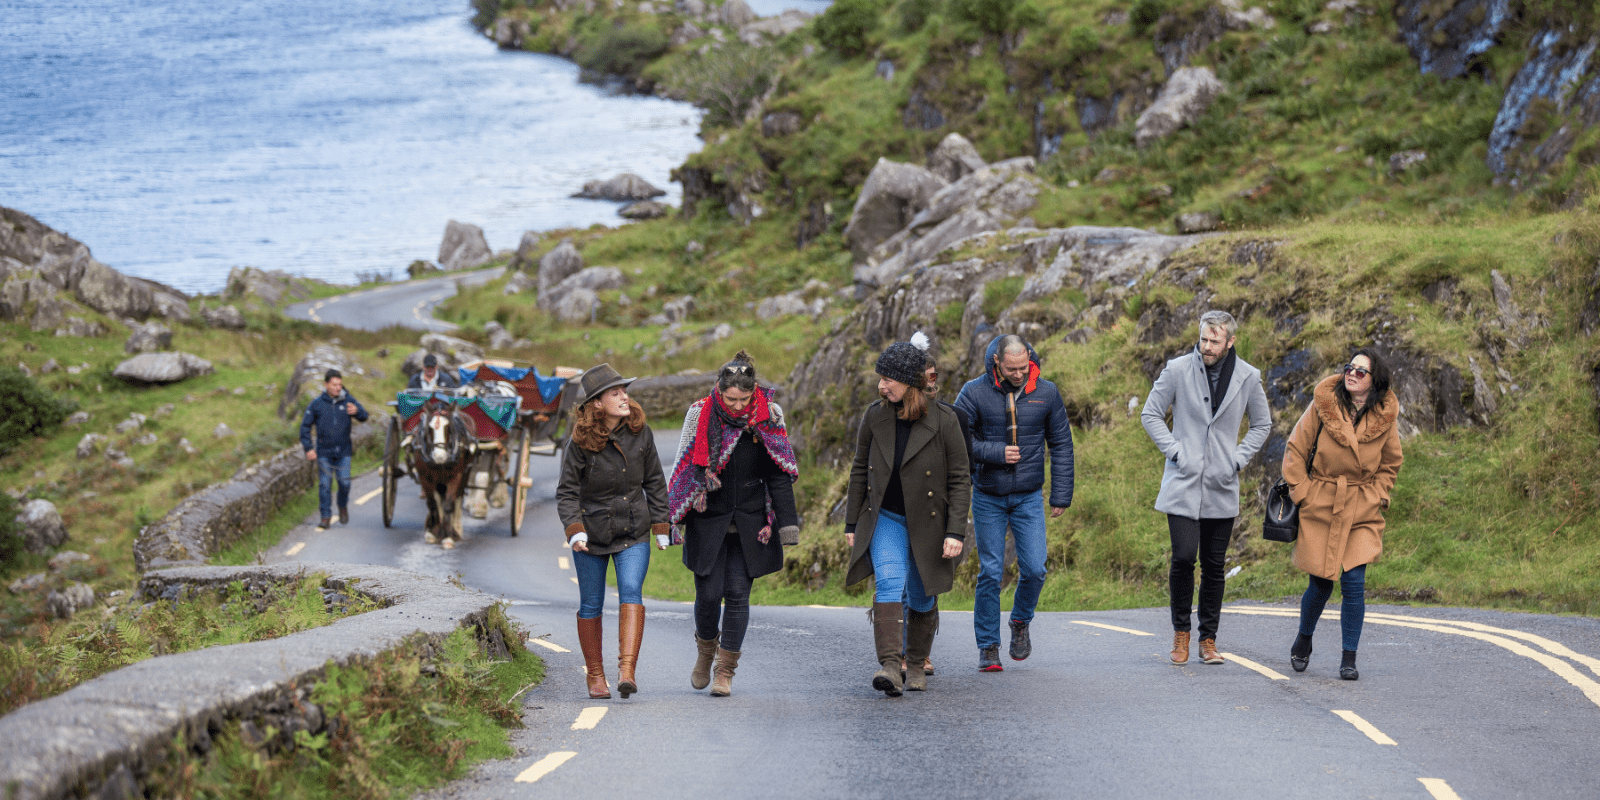 A group of people walking down a road in Killarney National Park